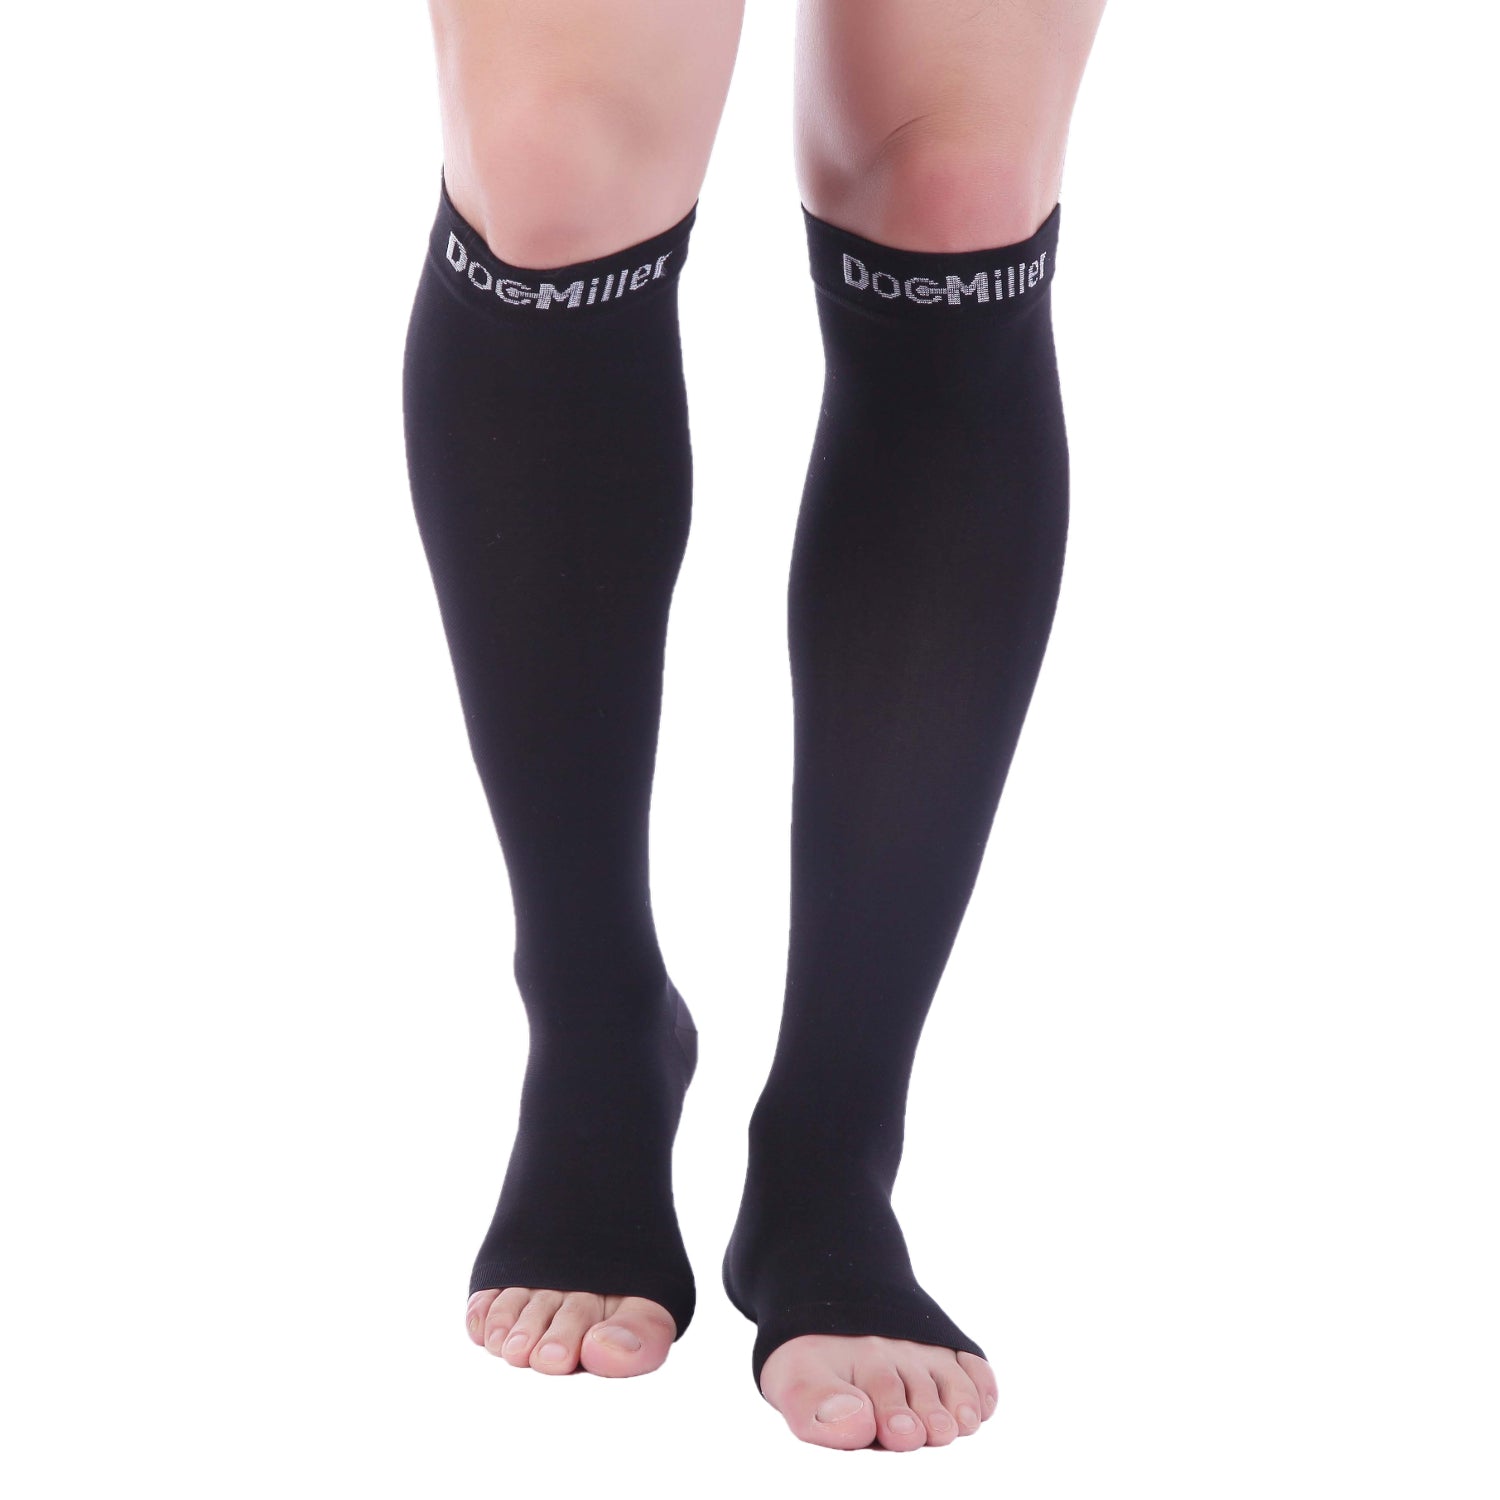 Doc Miller Open Toe Compression Socks 1 Pair 15-20 mmHg Firm Support